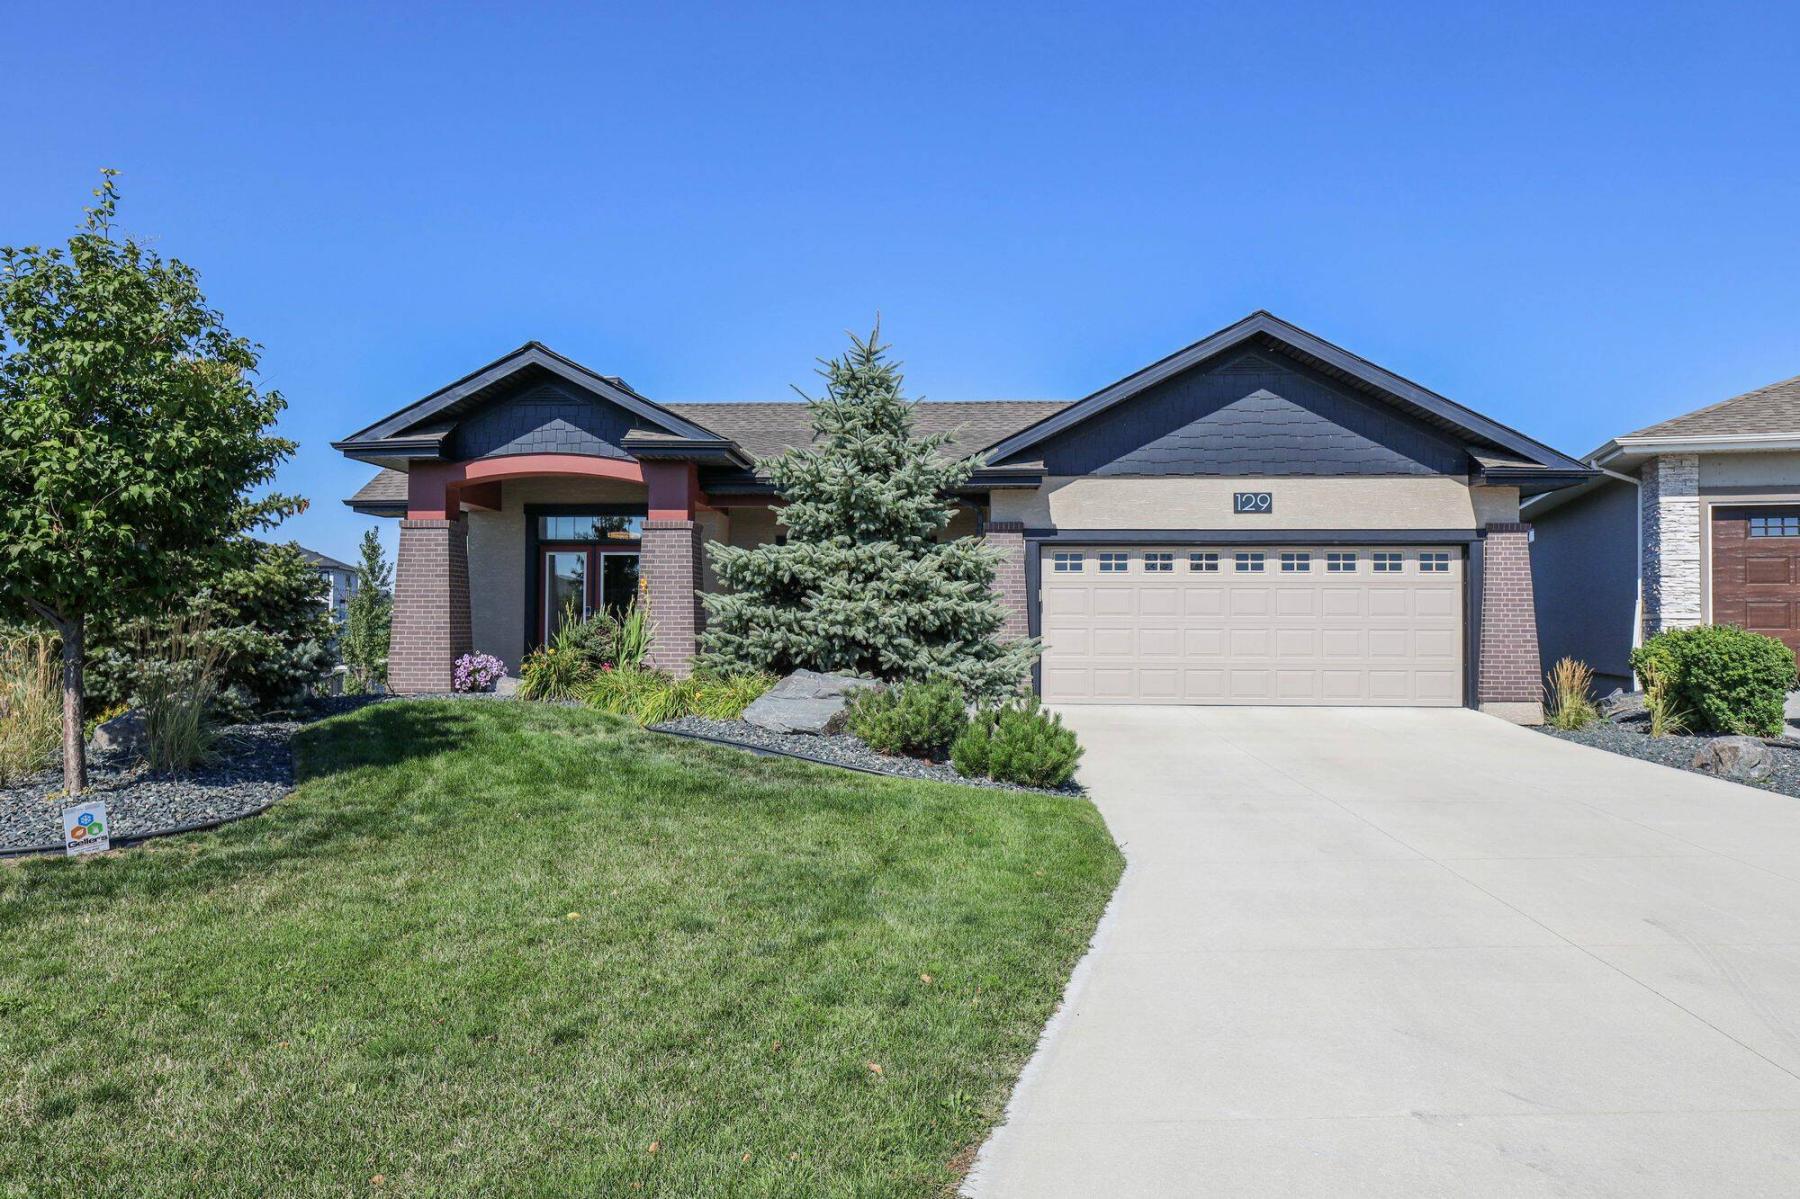  <p>Todd Lewys / Winnipeg Free Press</p>
<p>Situated on perhaps the best lot on Rose Lake Court, the 2,112 sq. ft. walk-out bungalow was designed to take advantage of its surroundings.</p> 